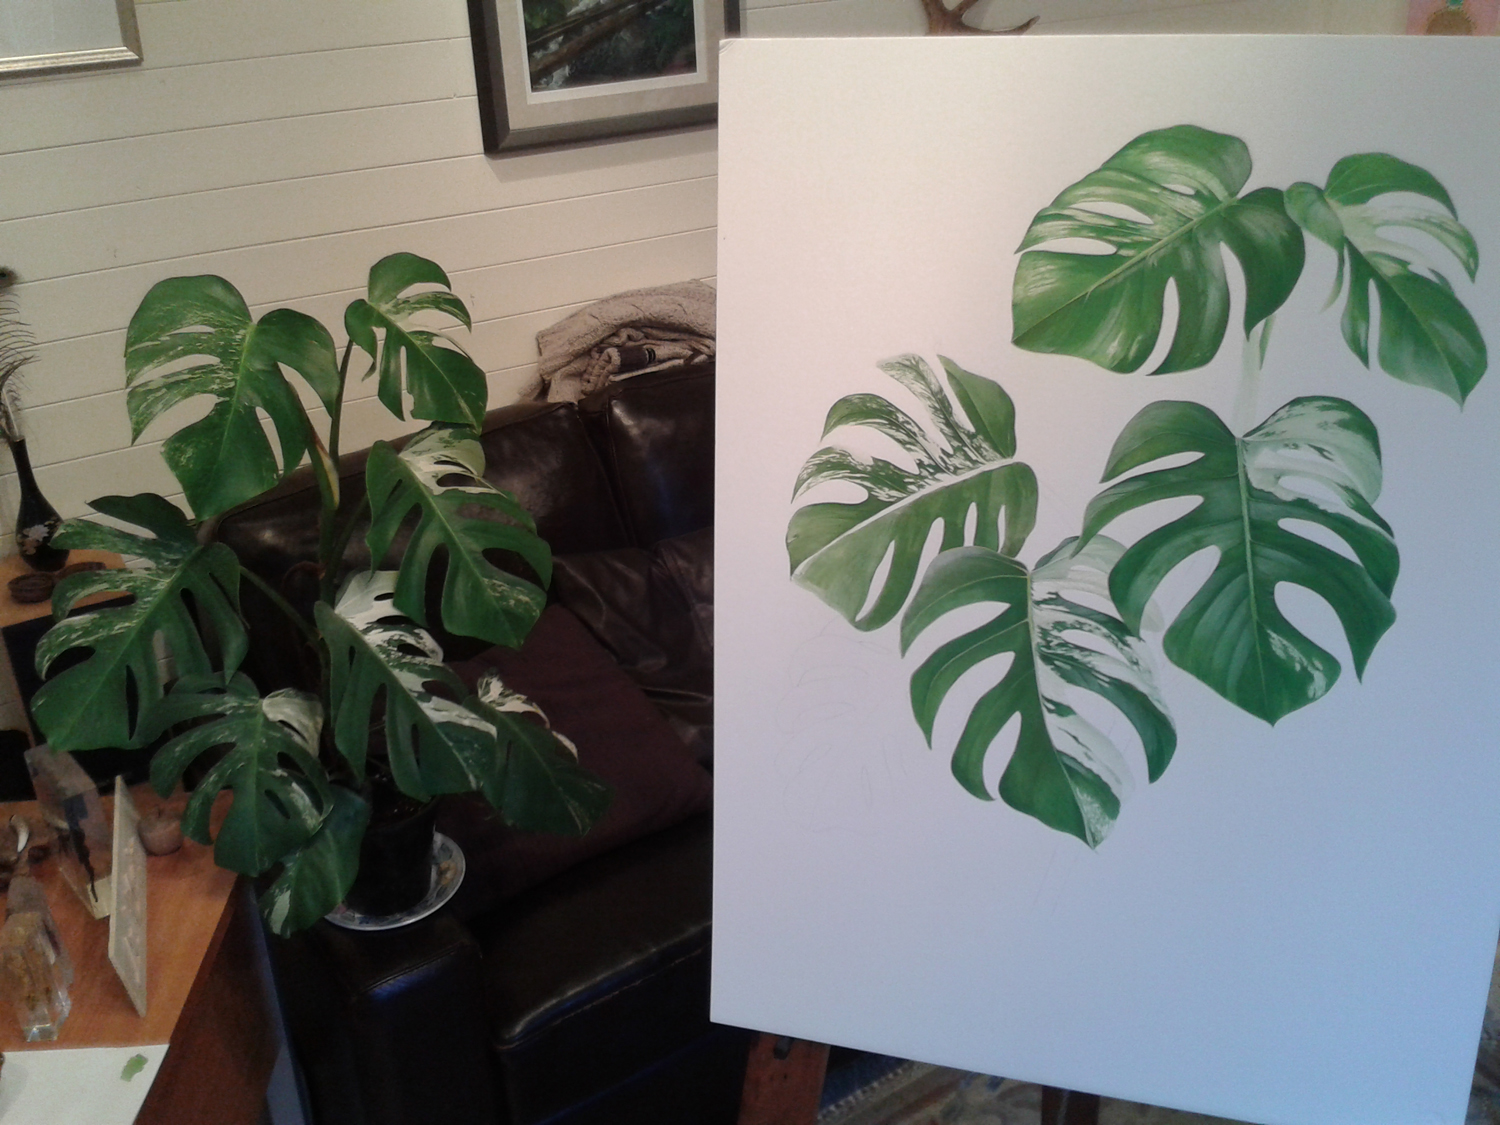 Variegated Cheese Plant next to Simon Williams' botanical painting